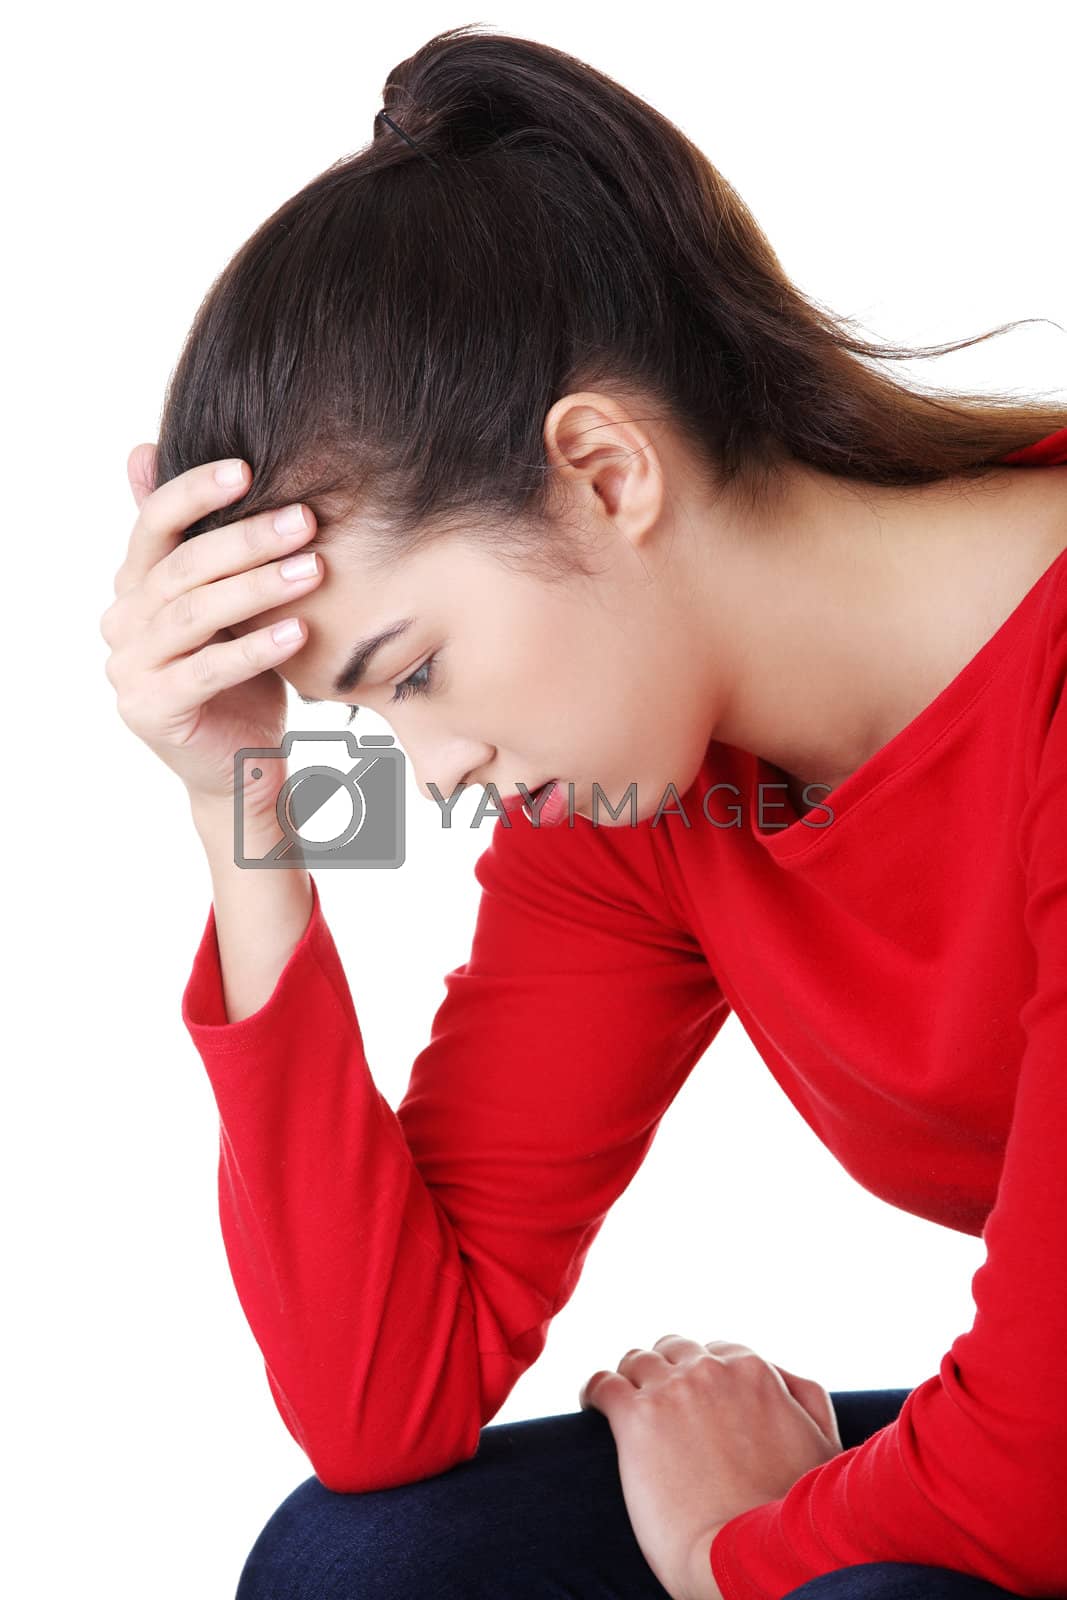 Royalty free image of Thoughtful woman with problem by BDS